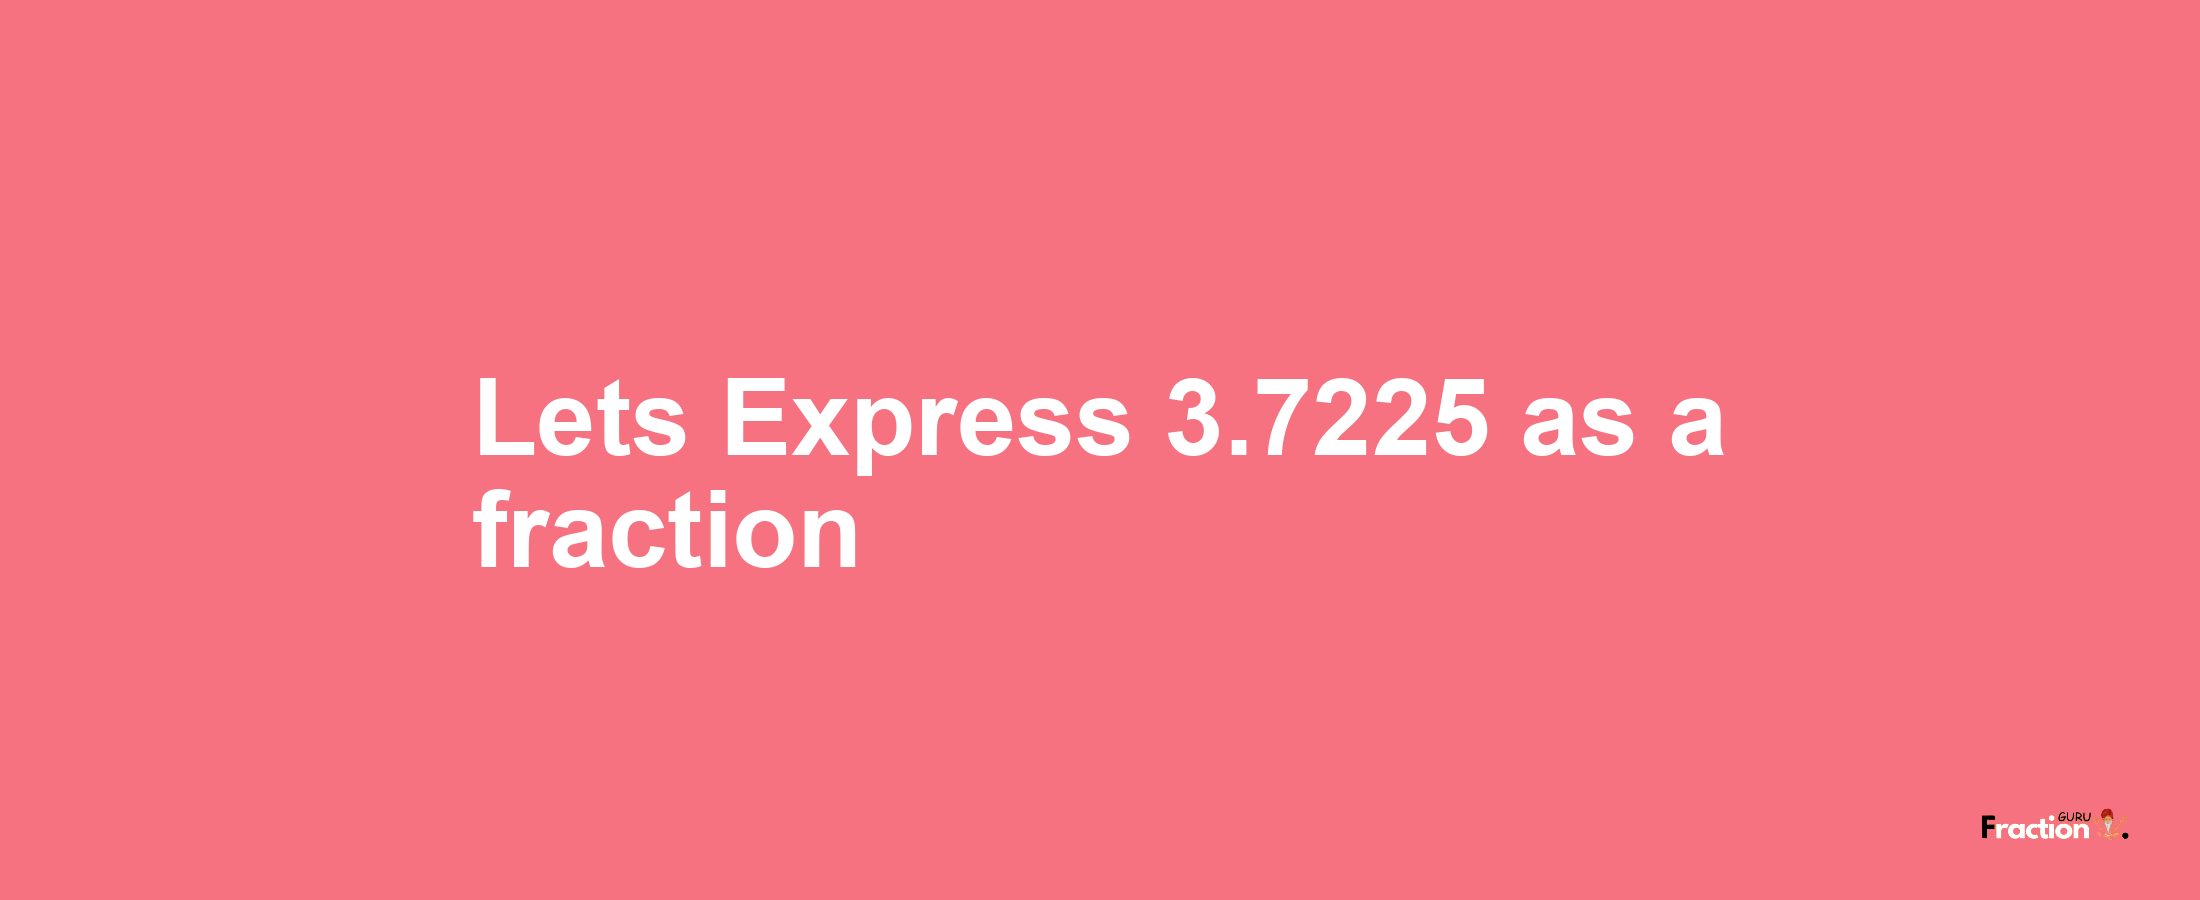 Lets Express 3.7225 as afraction